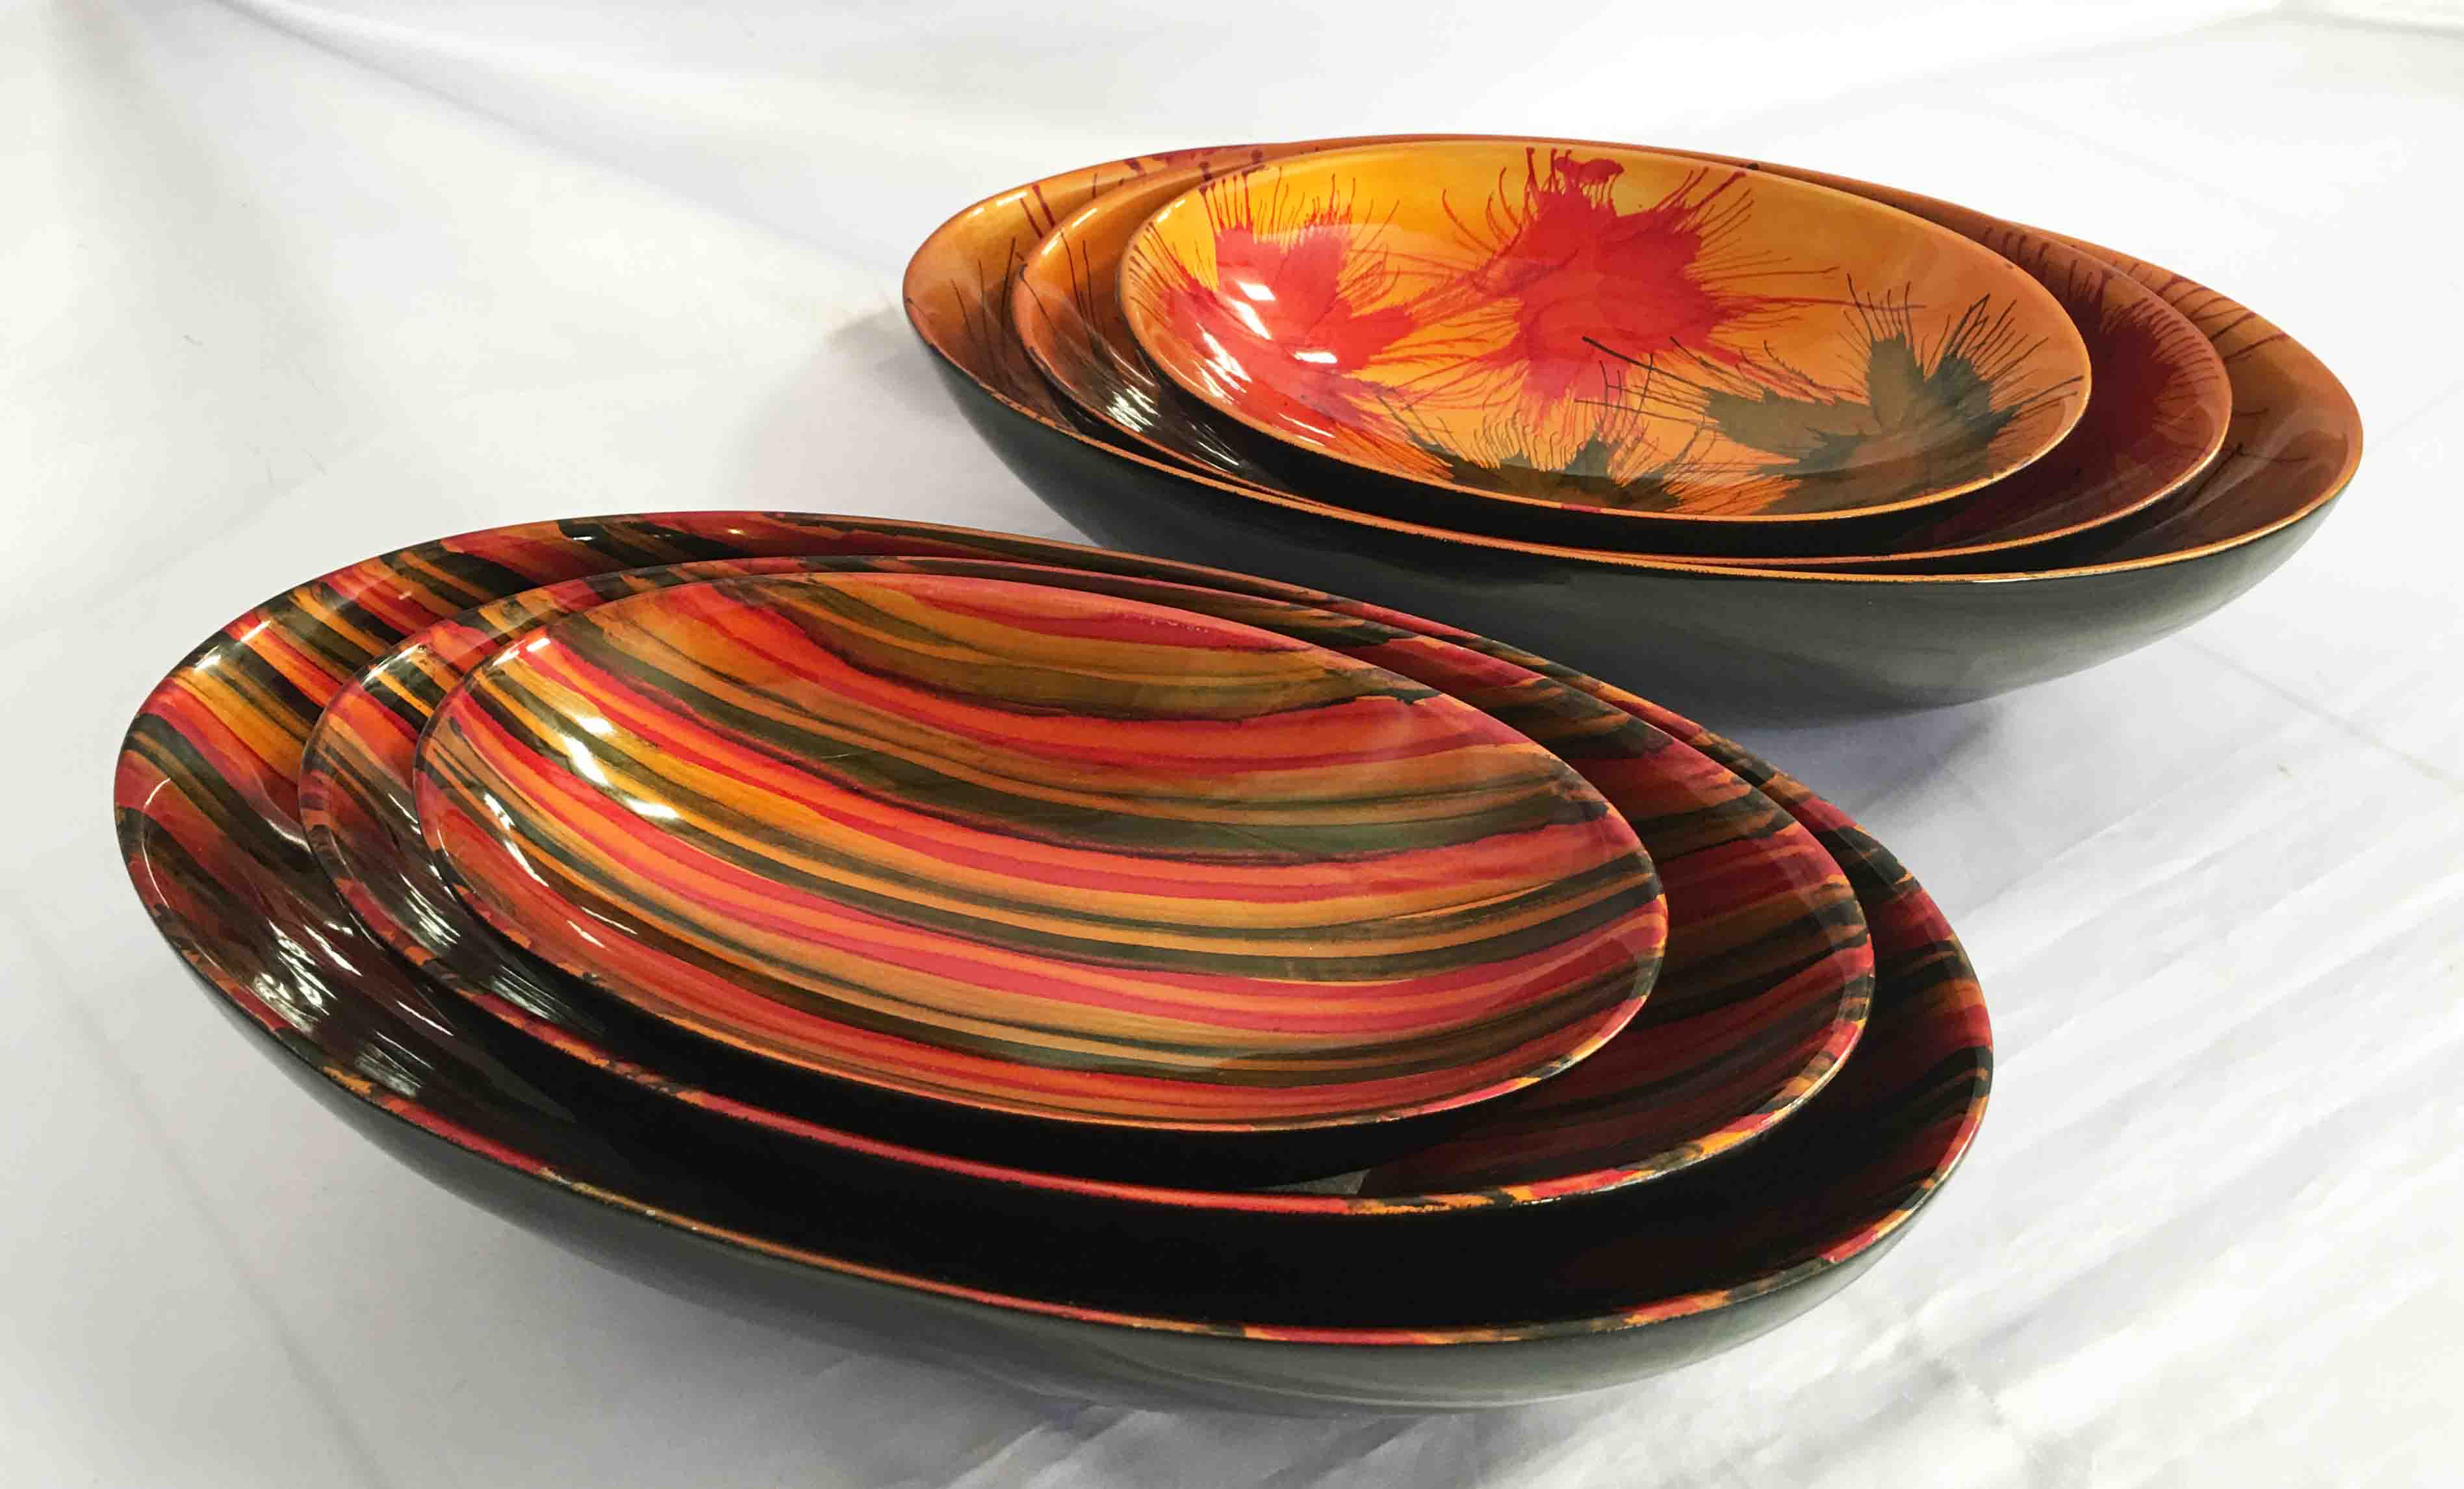 OF 3 OVAL BOWLS